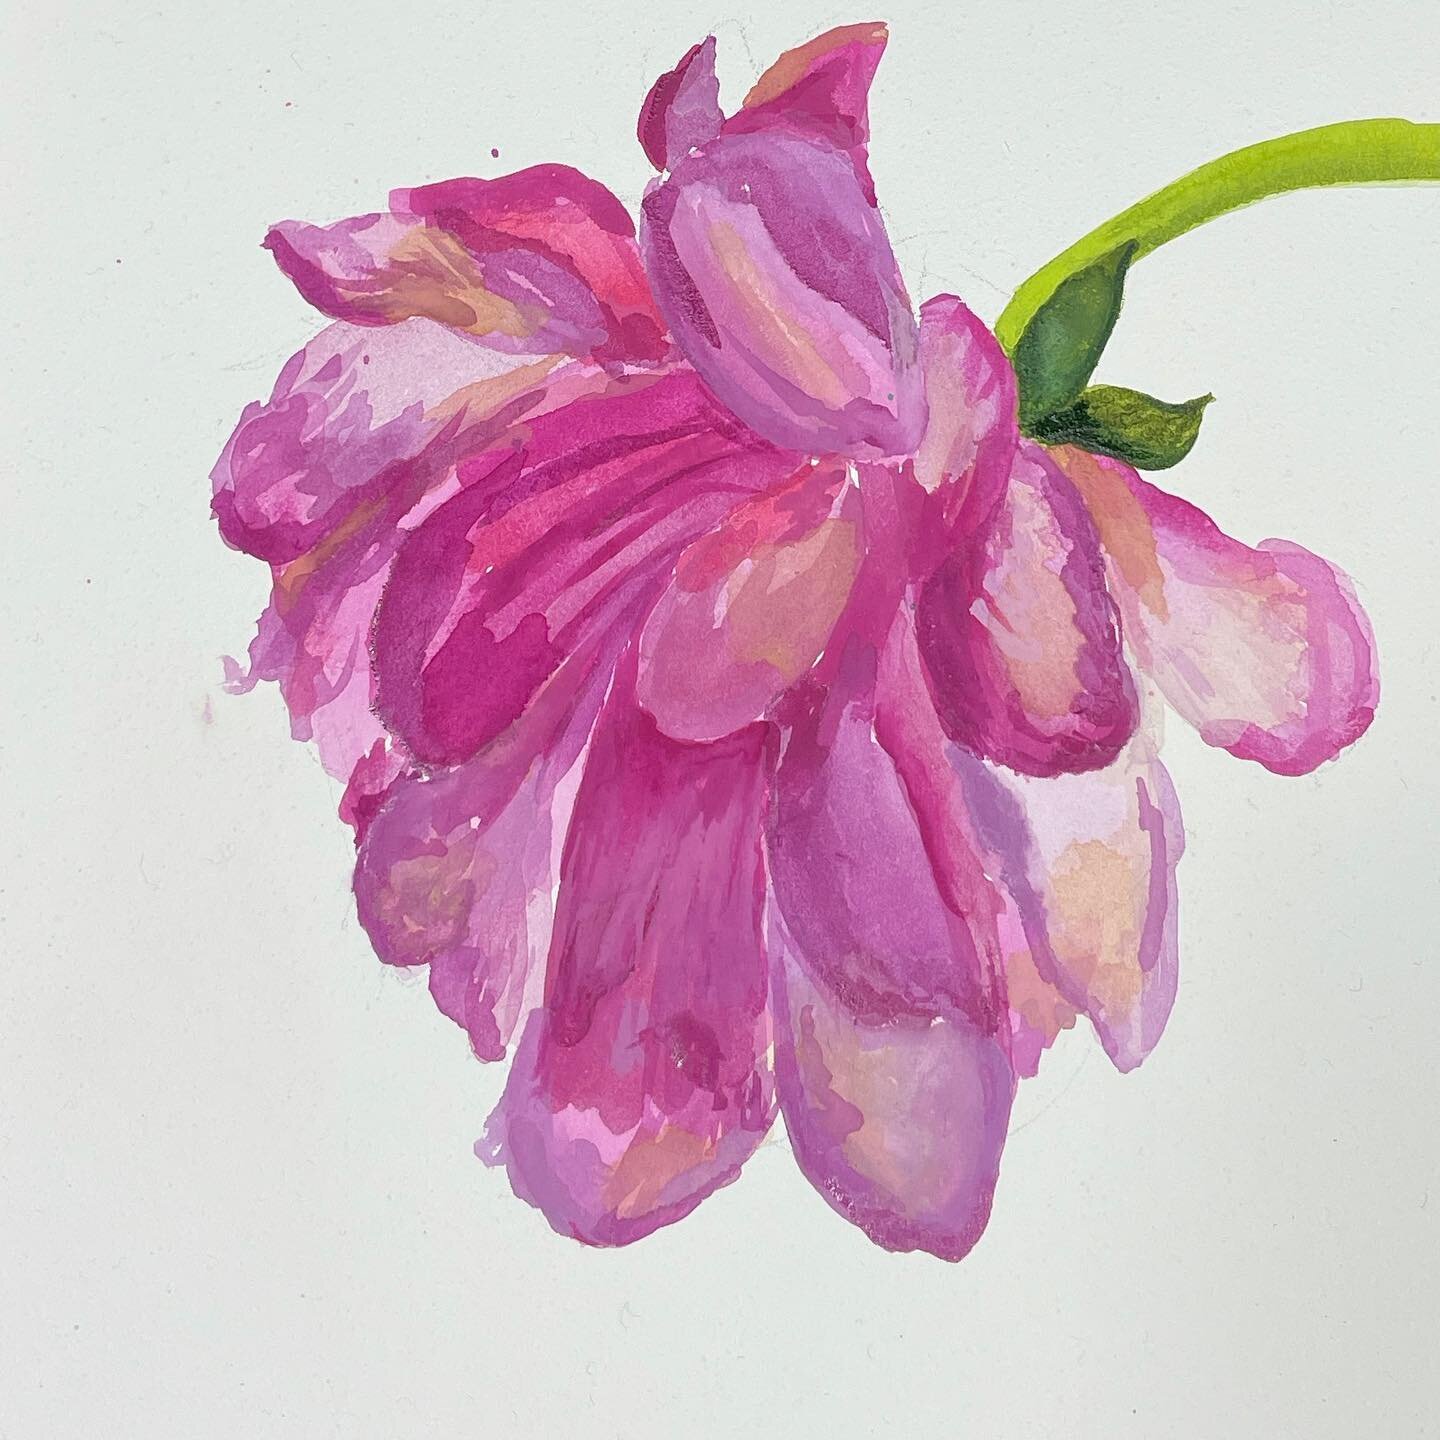 I&rsquo;ve been getting back into painting with #watercolor and #gouache .  This is a #peony from my backyard.  I wanted to paint it while it was nice and freshly cut, but life kept me from working on it.  Lucky for me, as it dried out, the colors go